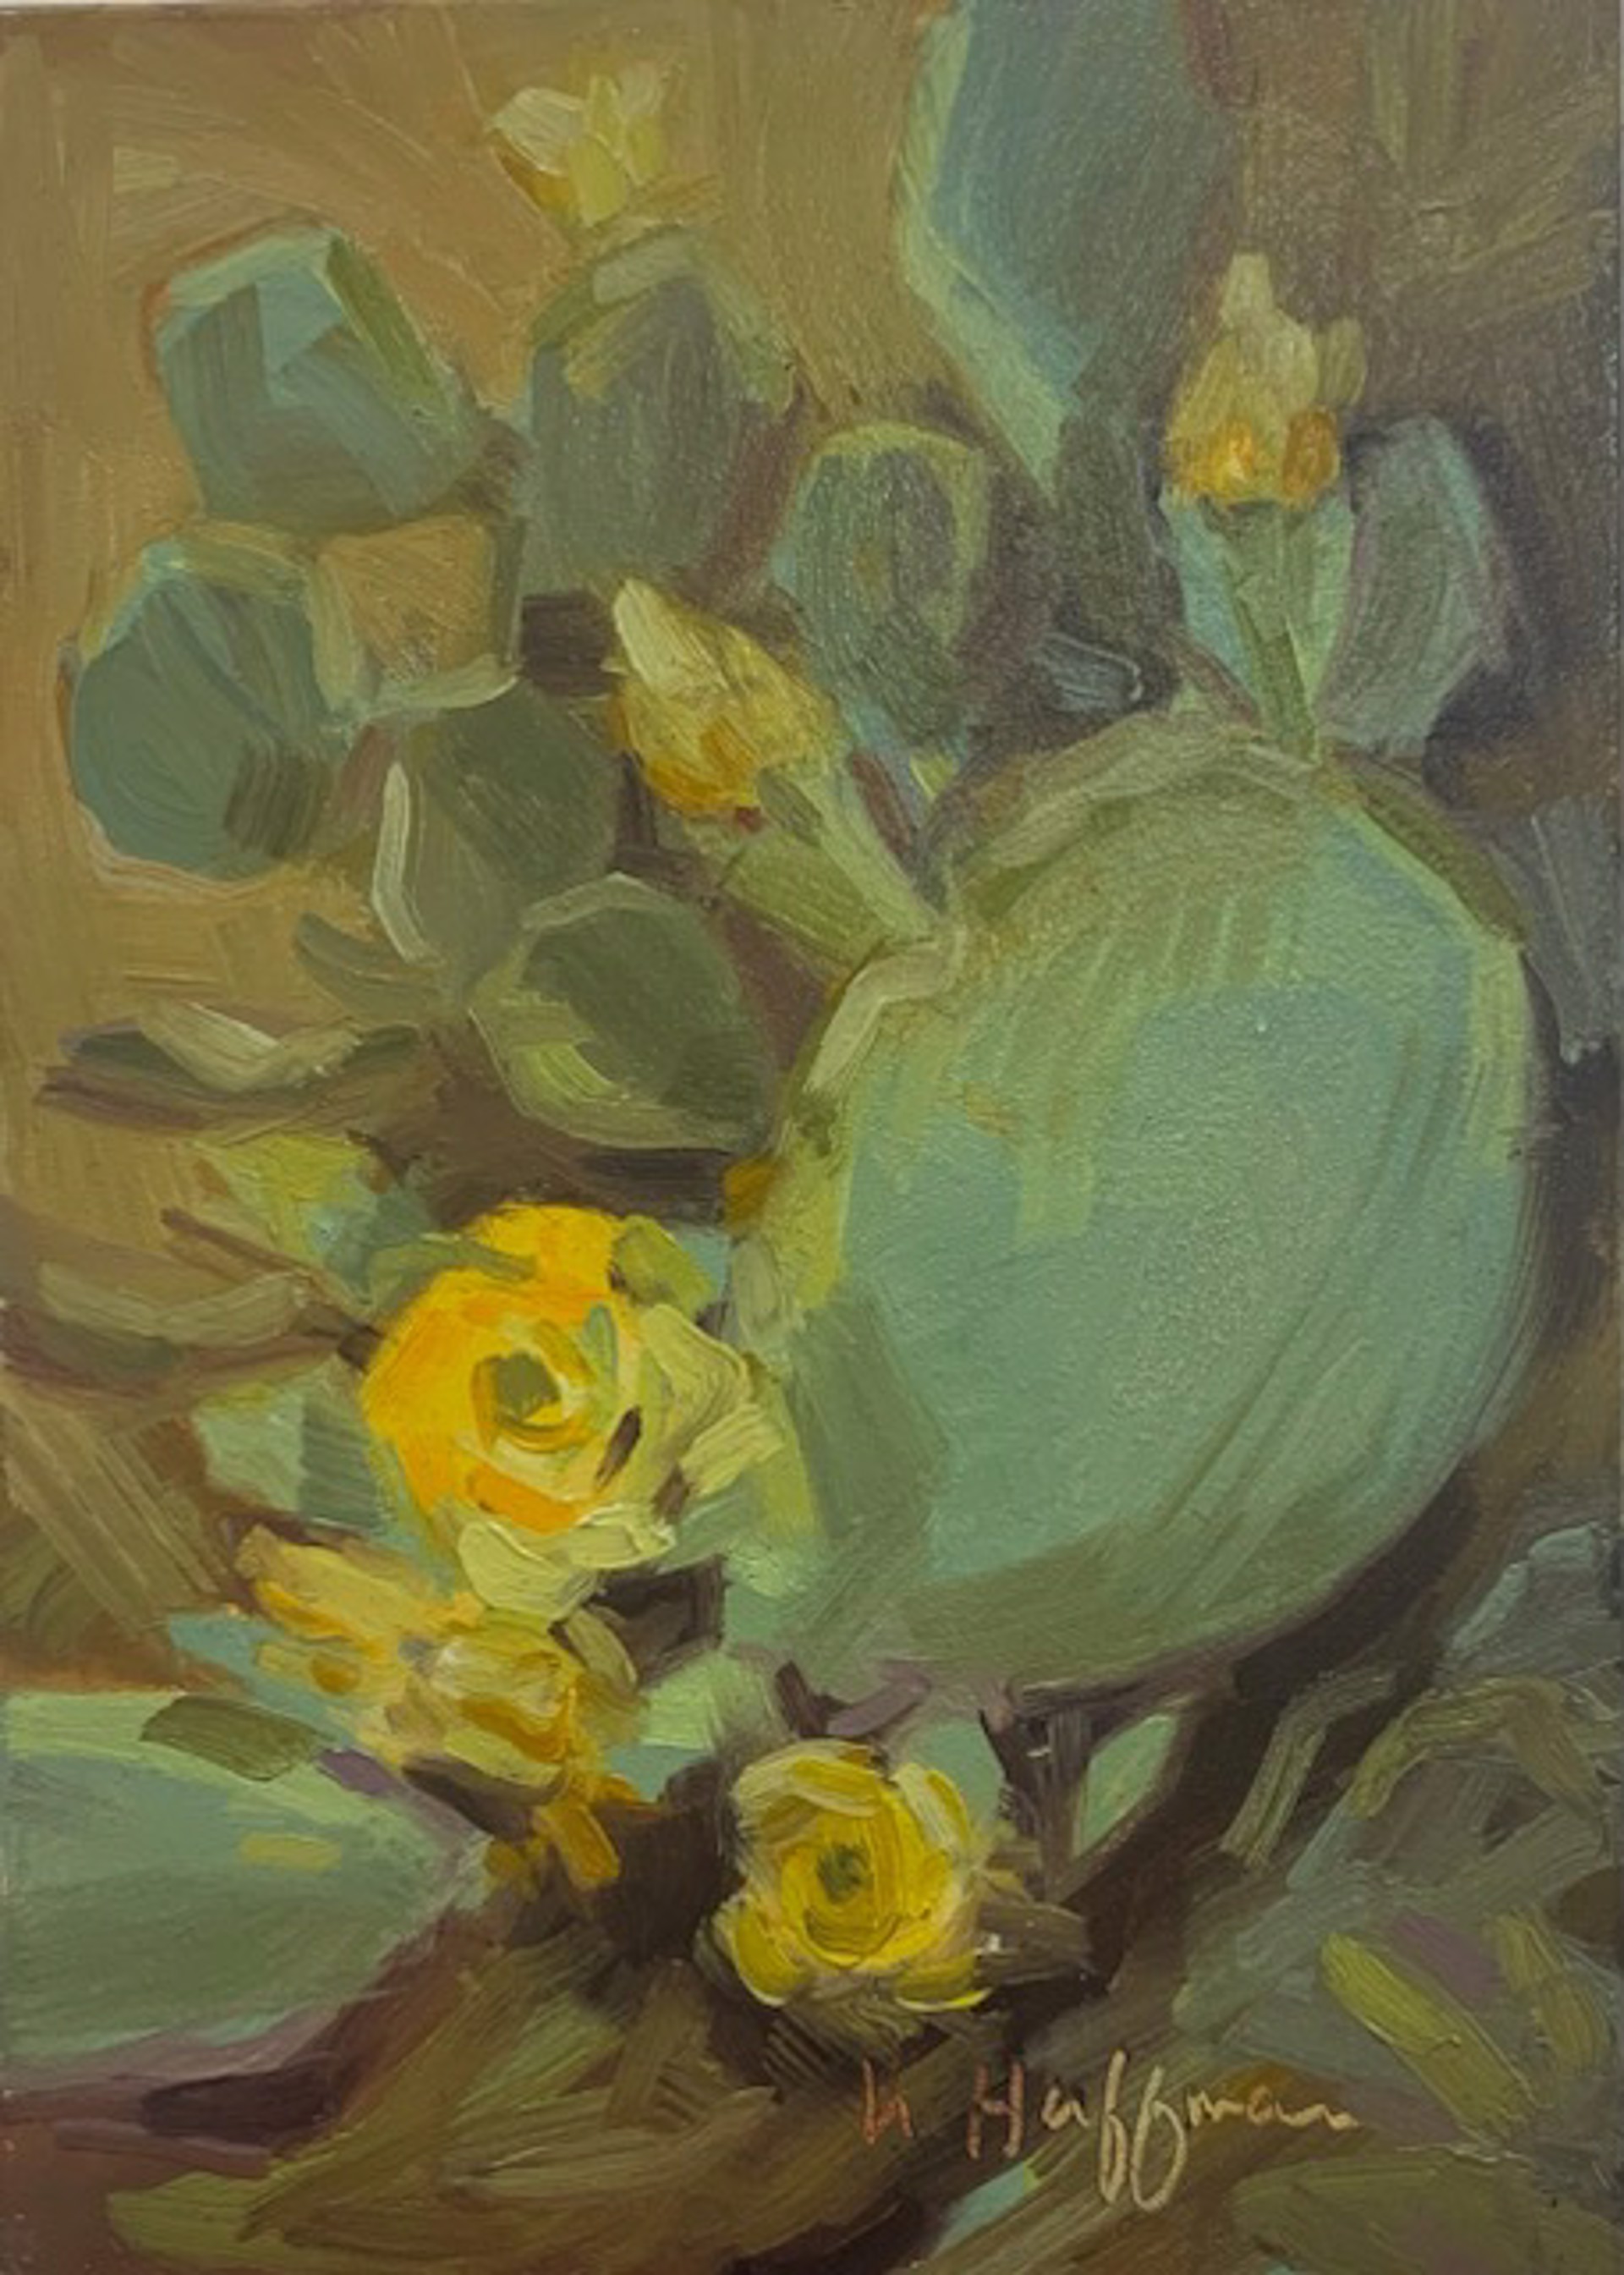 YELLOW PRICKLY PEAR by Nancy Huffman